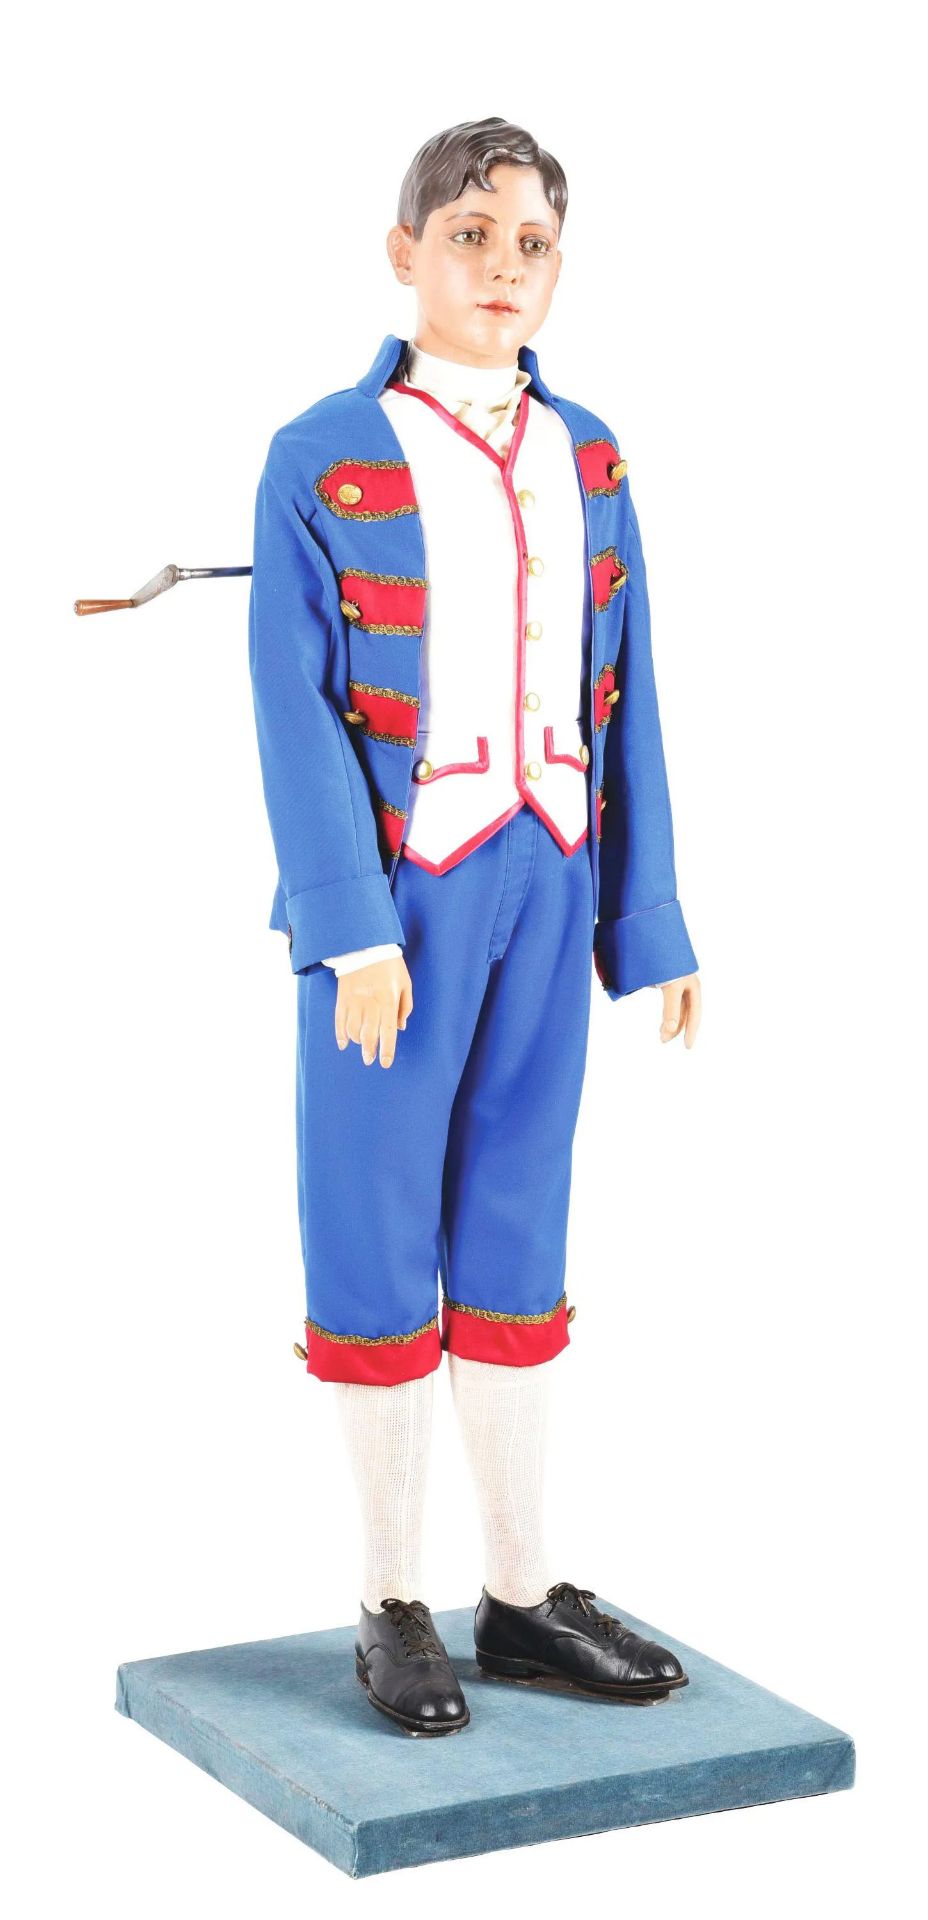 Life Size Young Boy Dressed In Majorette Or Band Costume